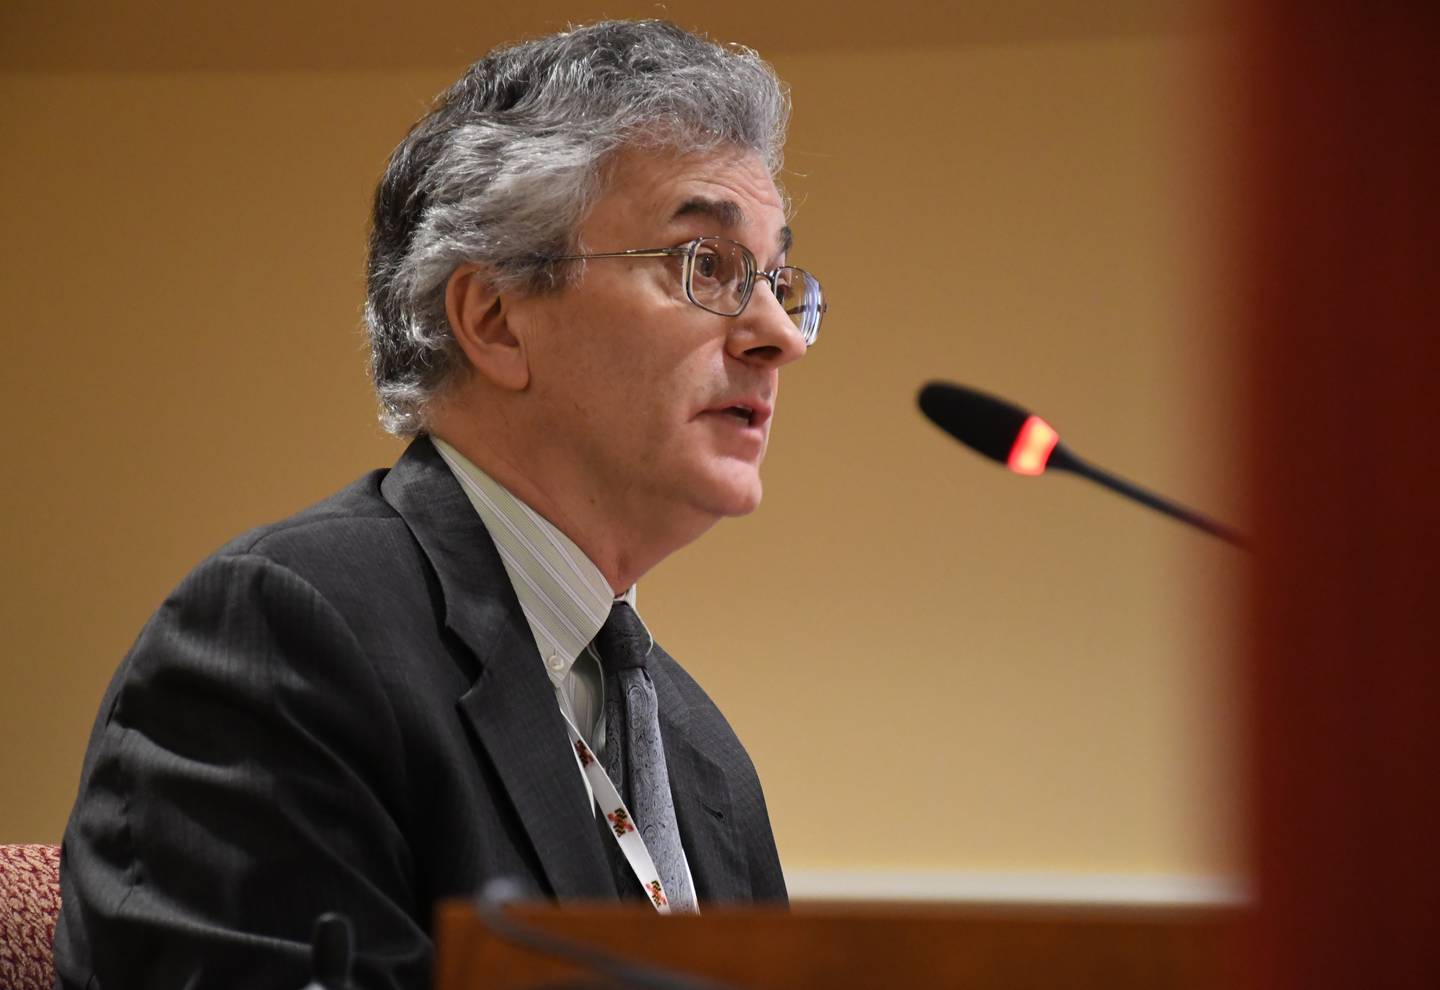 Vincent Schiraldi, acting secretary of juvenile services, testifies before a Maryland Senate budget subcommittee in Annapolis on Thursday, Feb. 9, 2023.